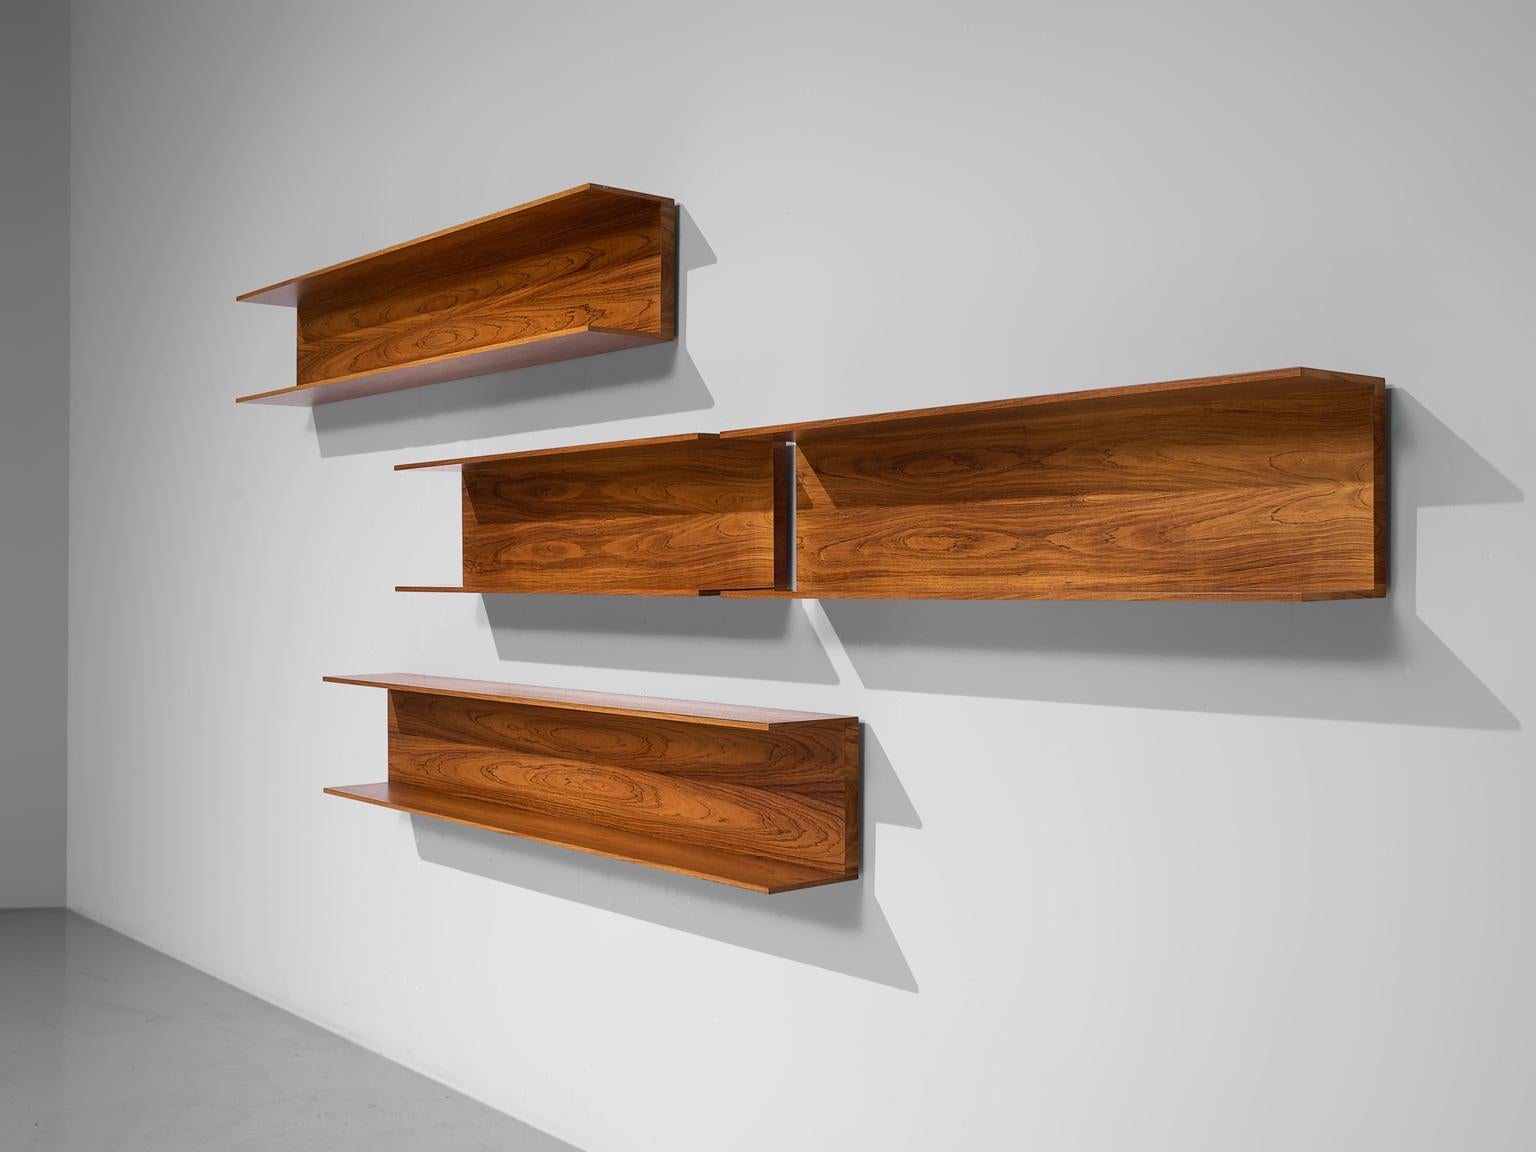 Walter Wirz for Wilhelm Renz, wall shelves, rosewood, Germany, 1965.

These rosewood wall shelves are designed by Walter Wirz for the German company Wilhelm Renz. The shelves, by now a true midcentury design classic, are both well-made and durable